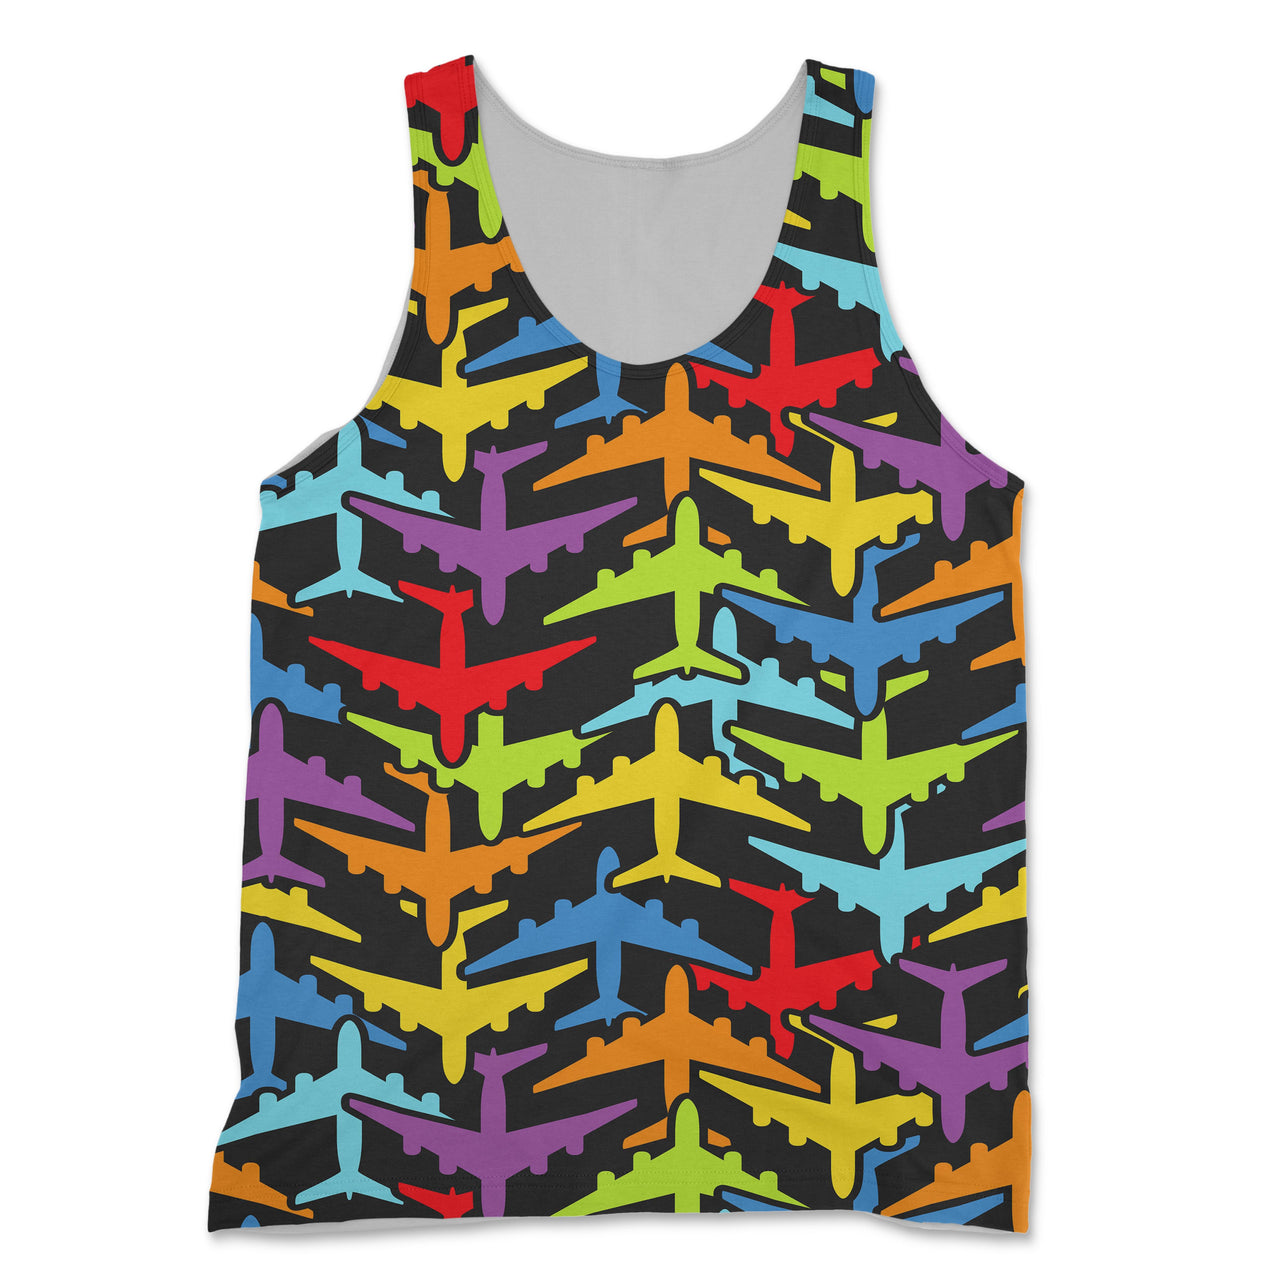 Super Colourful Airplanes Designed 3D Tank Tops